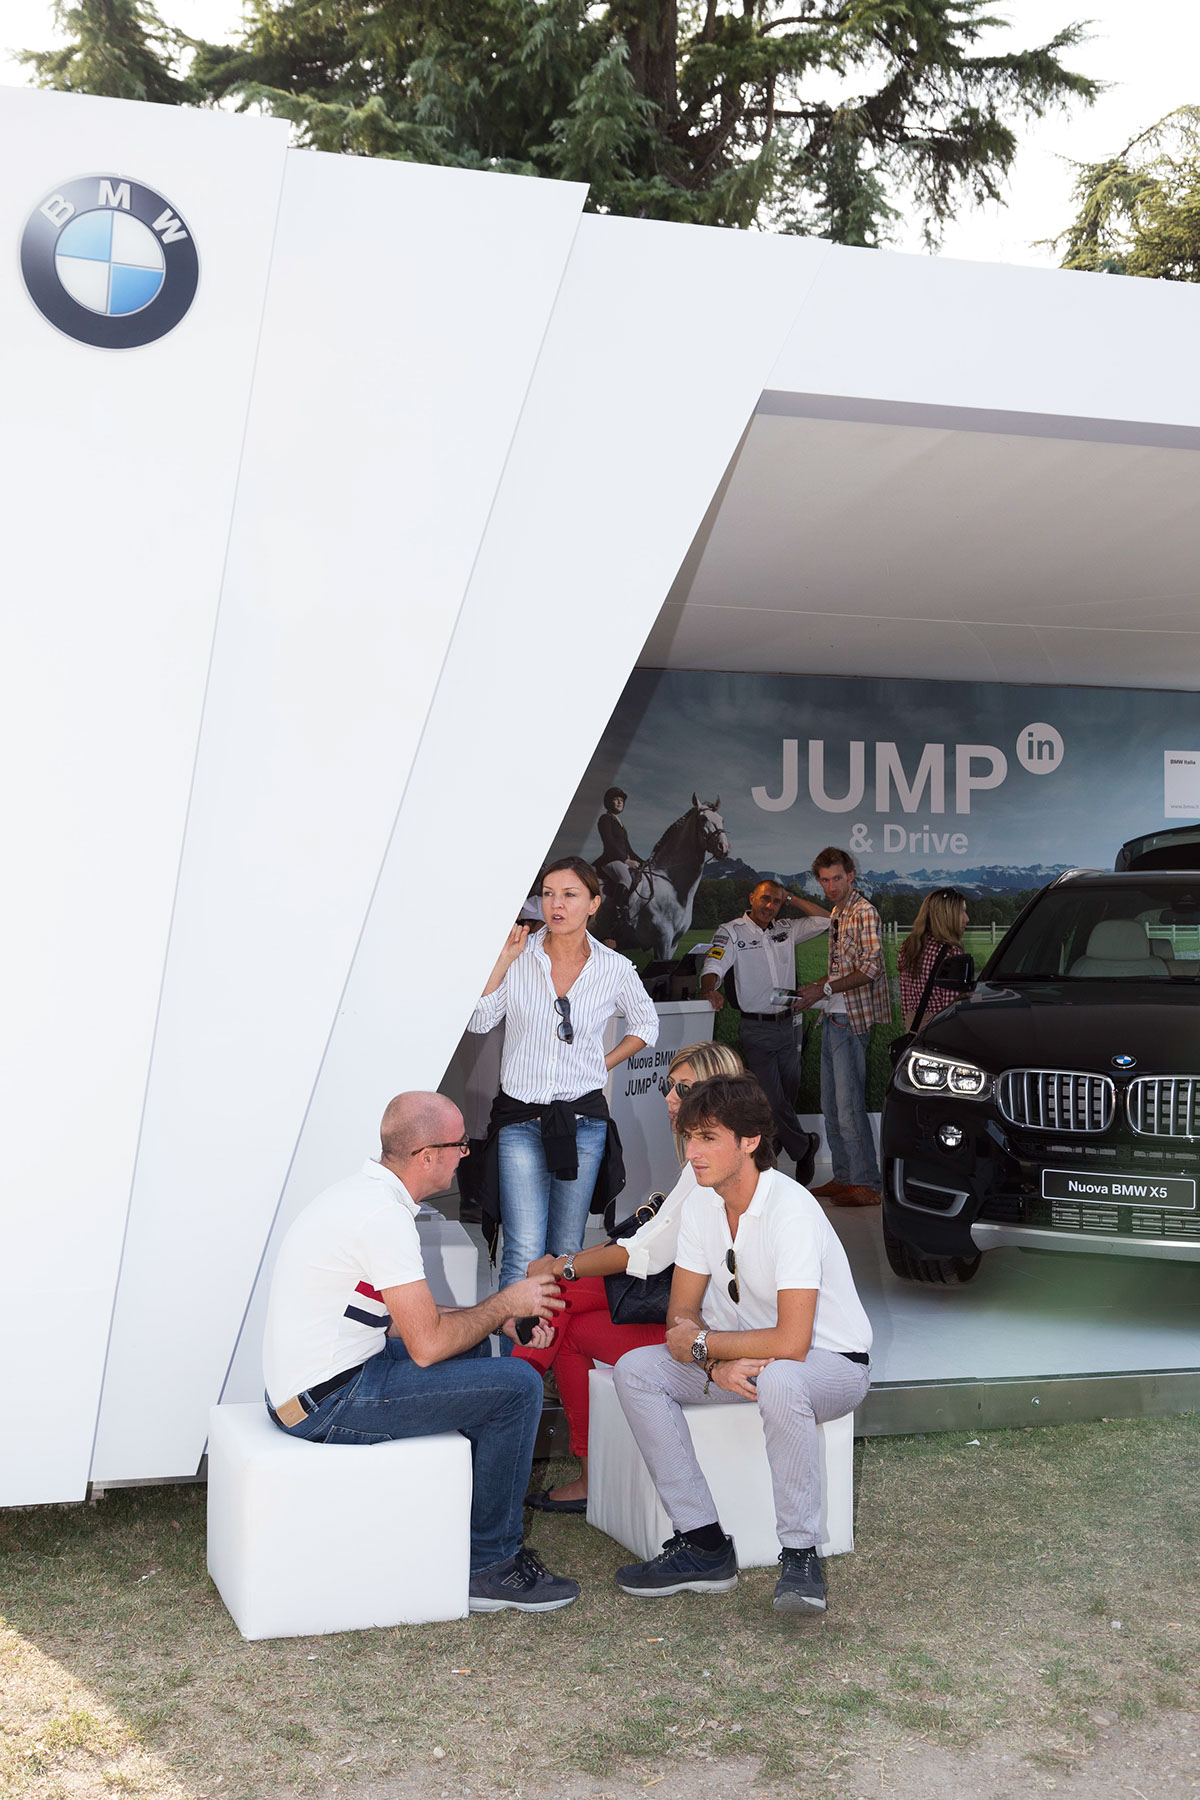 BMW horse jump luxury people sport design car open air Playful drive Experience concept